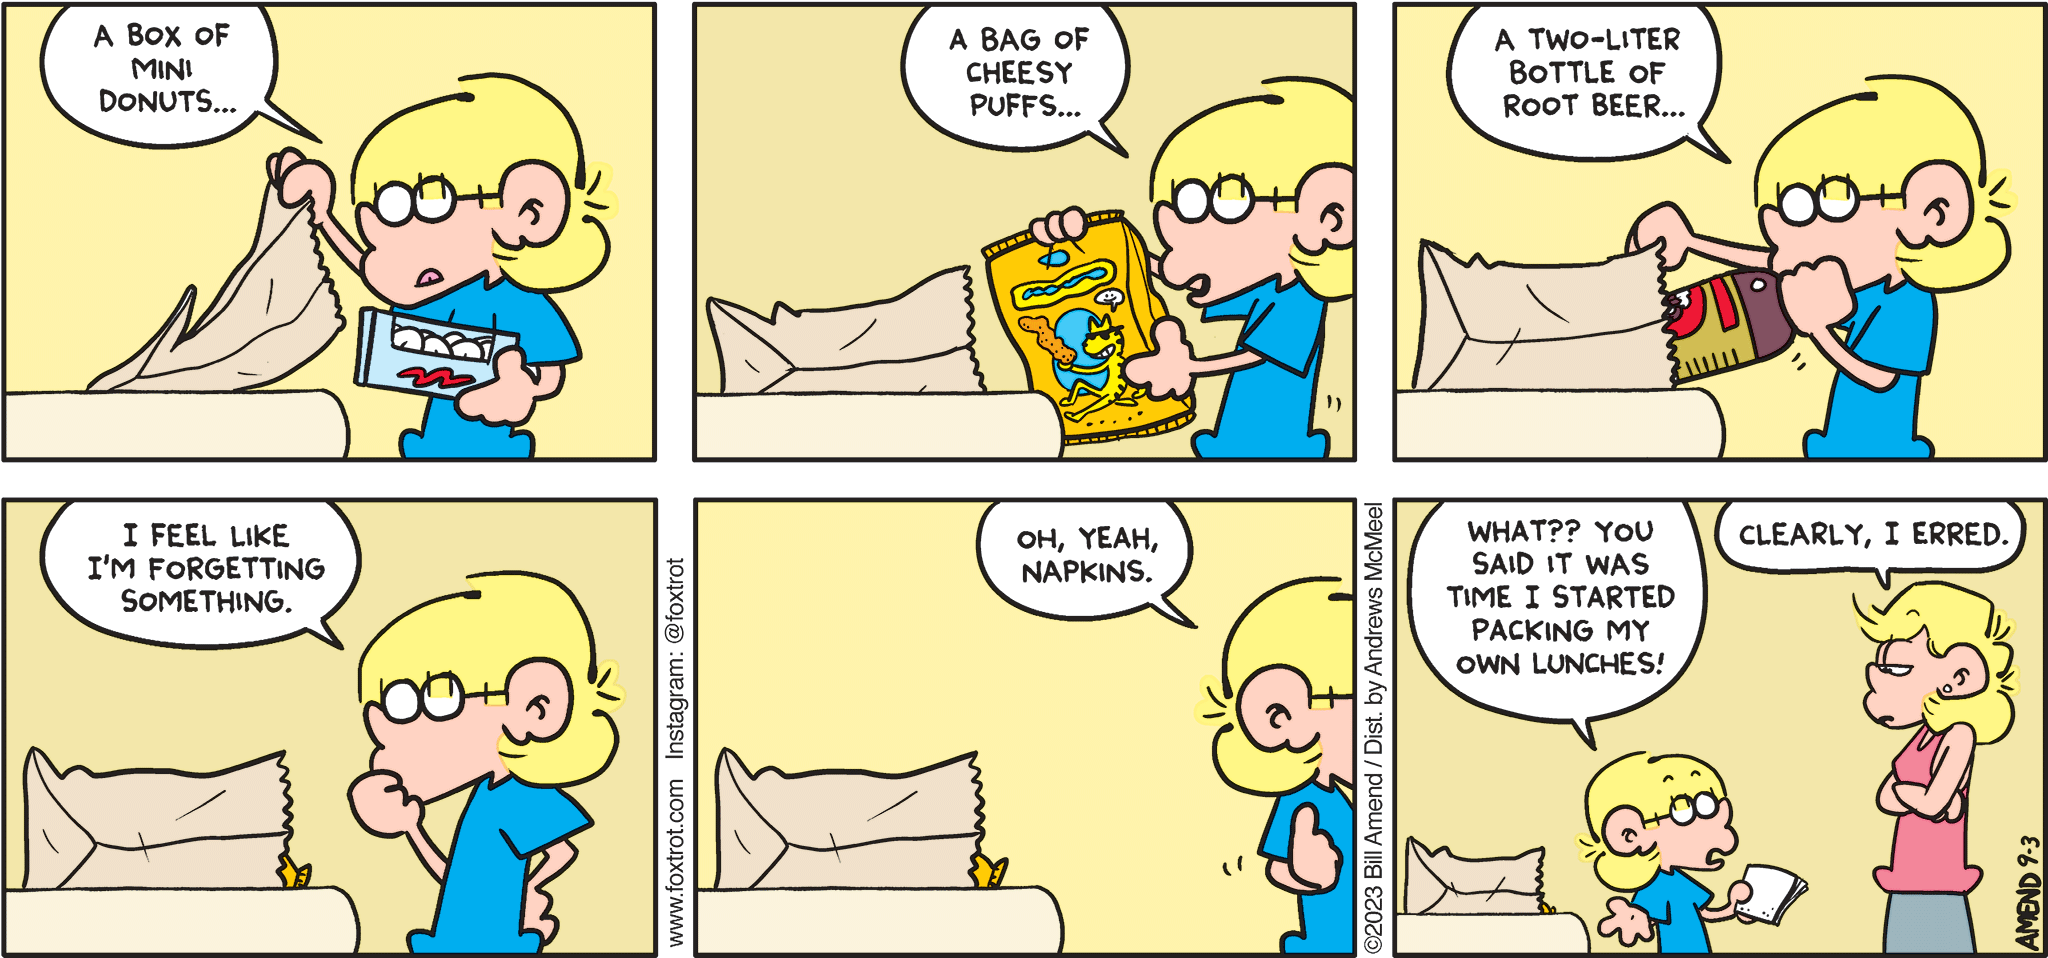 FoxTrot comic strip by Bill Amend - "Packing Up" published September 3, 2023 - Transcript: Jason Fox: A box of mini donuts... A bag of cheesy puffs... A two-liter bottle of root beer... I feel like I'm forgetting something. Oh, yeah, napkins. What?? You said it was time I started packing my own lunches! Andy Fox: Clearly, I erred.